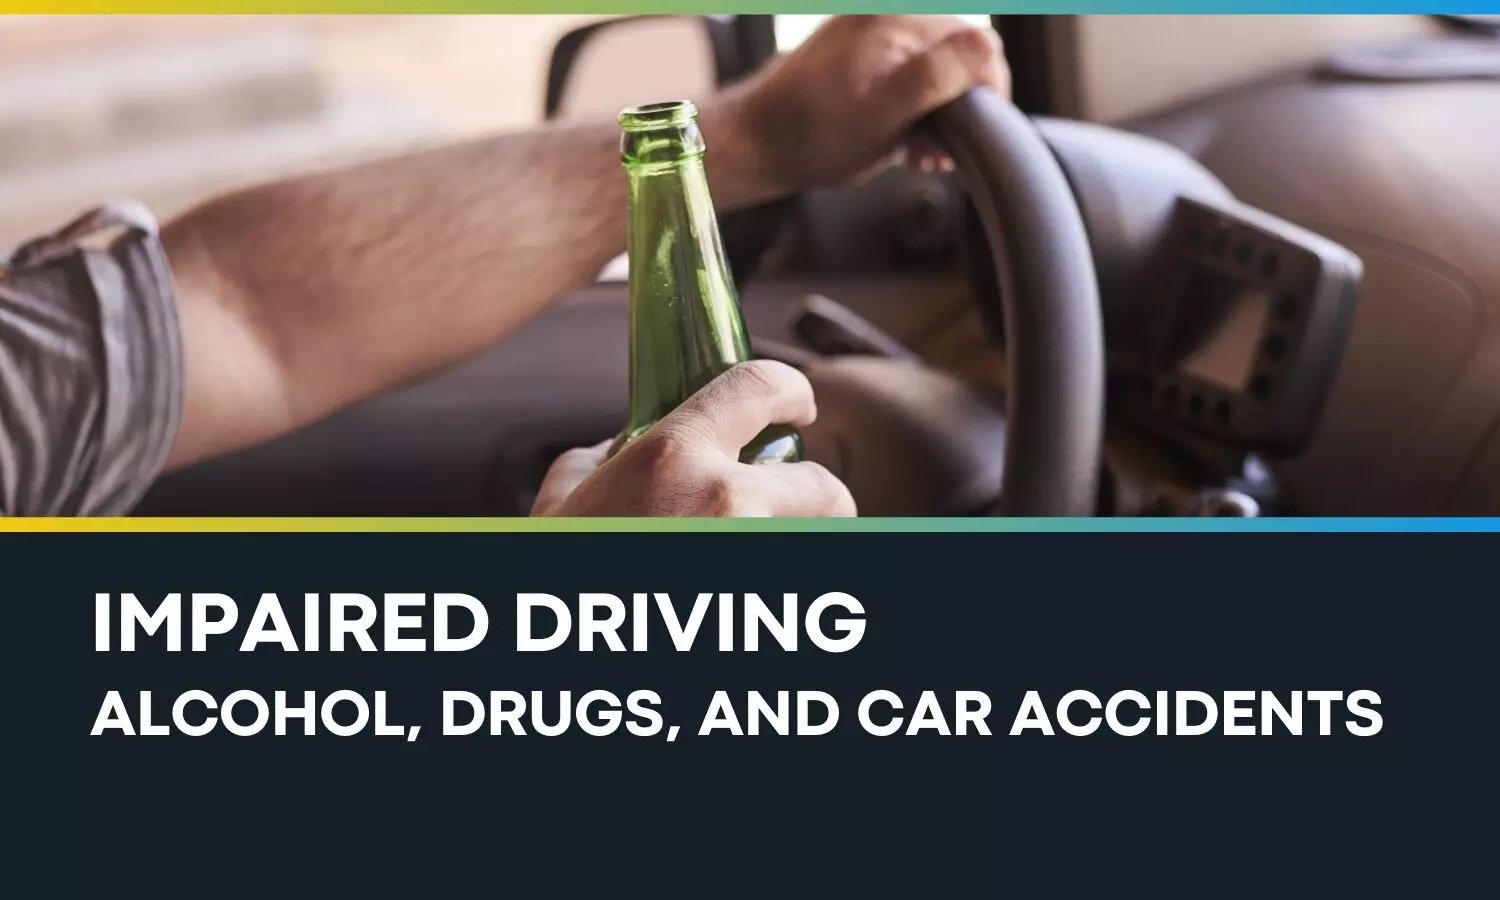 Impaired Driving - Alcohol, Drugs, and Car Accidents